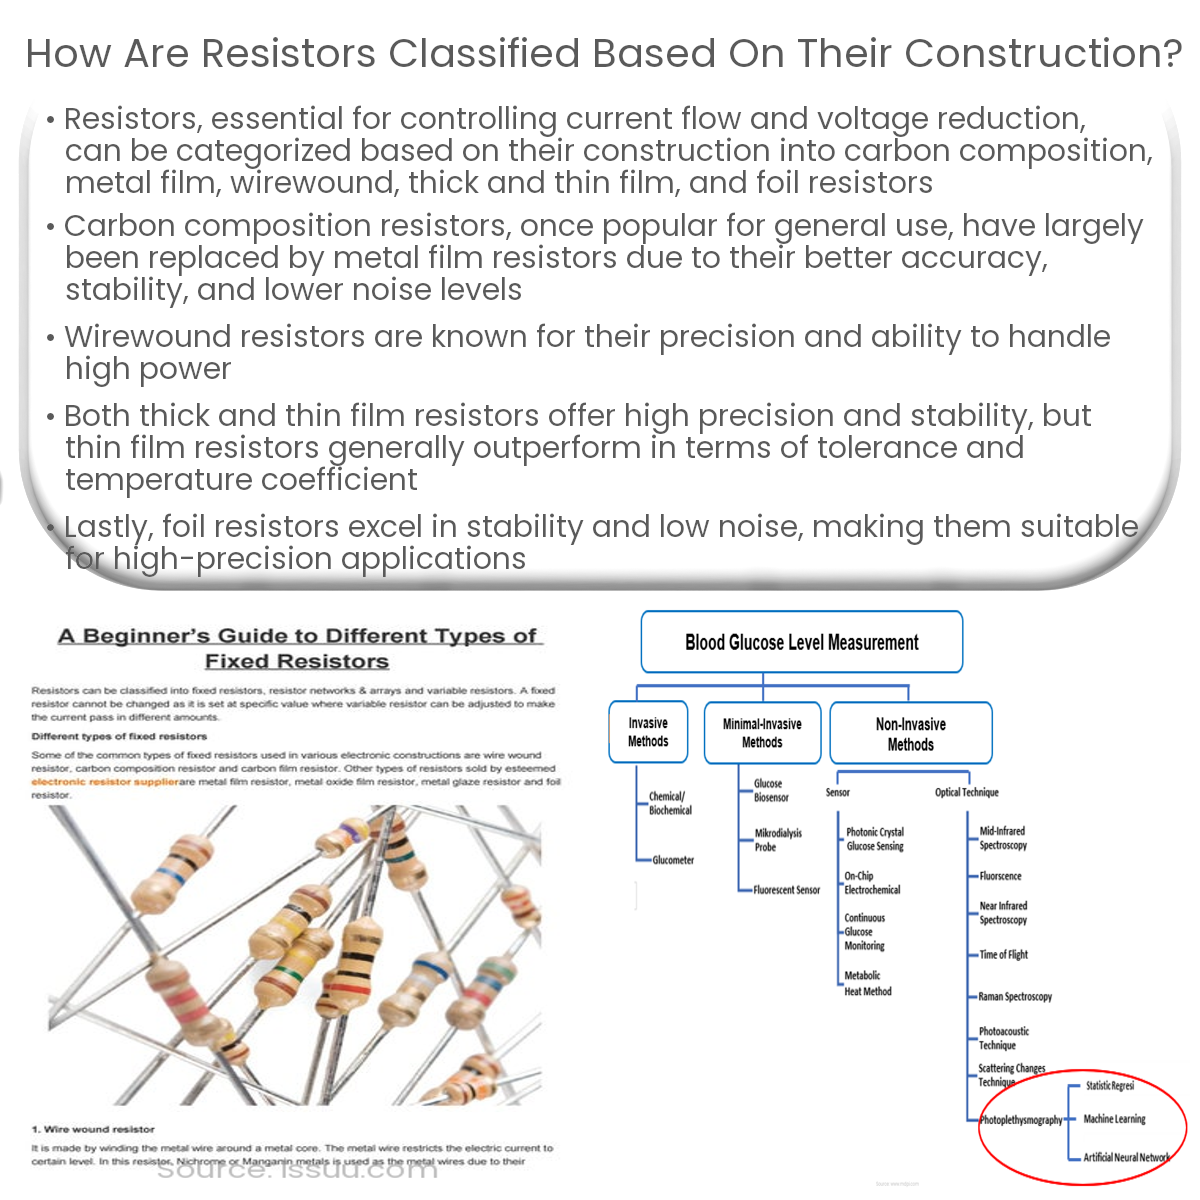 How are resistors classified based on their construction?